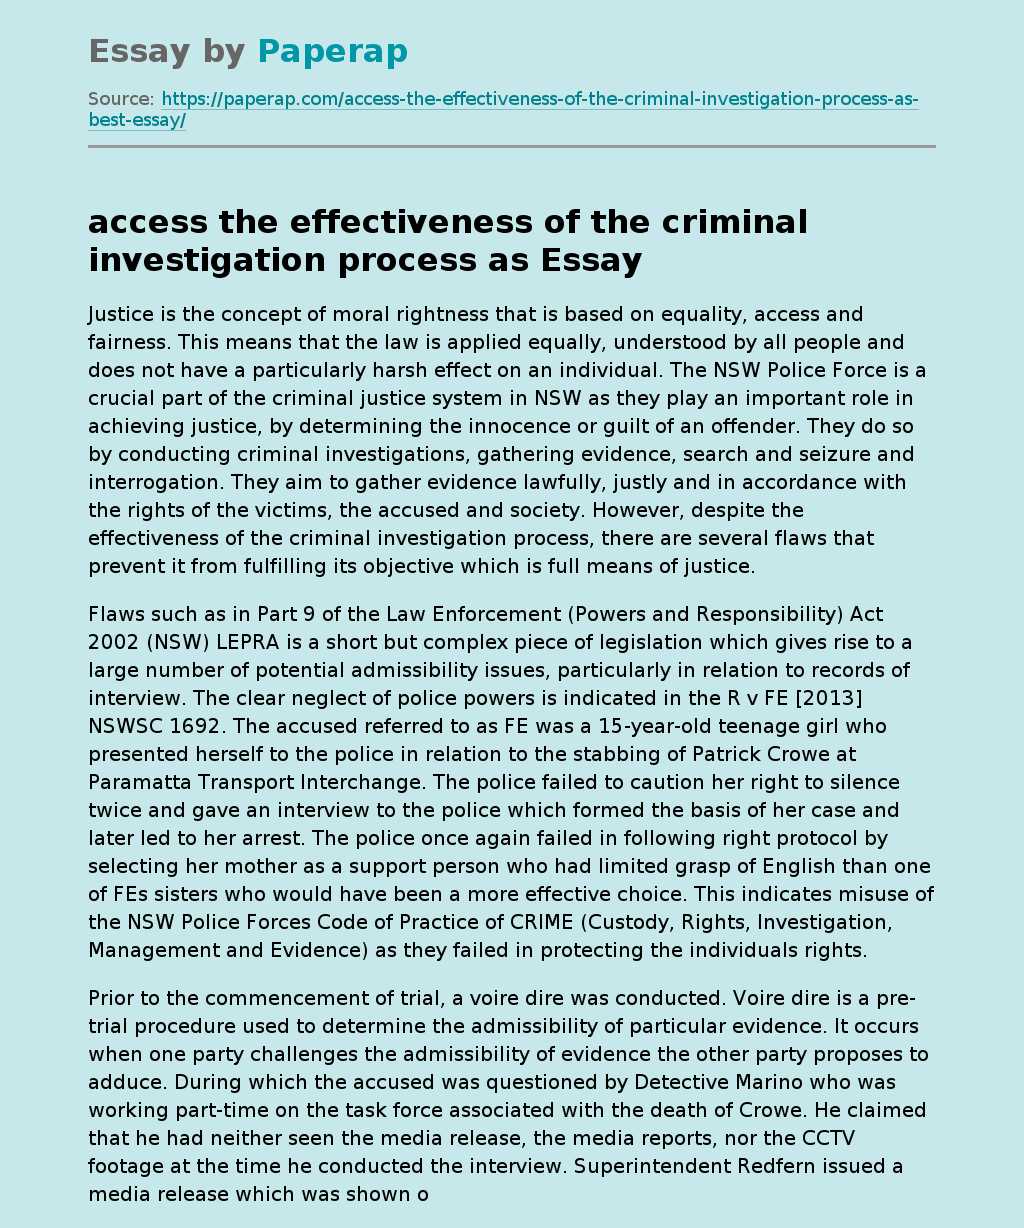 access the effectiveness of the criminal investigation process as